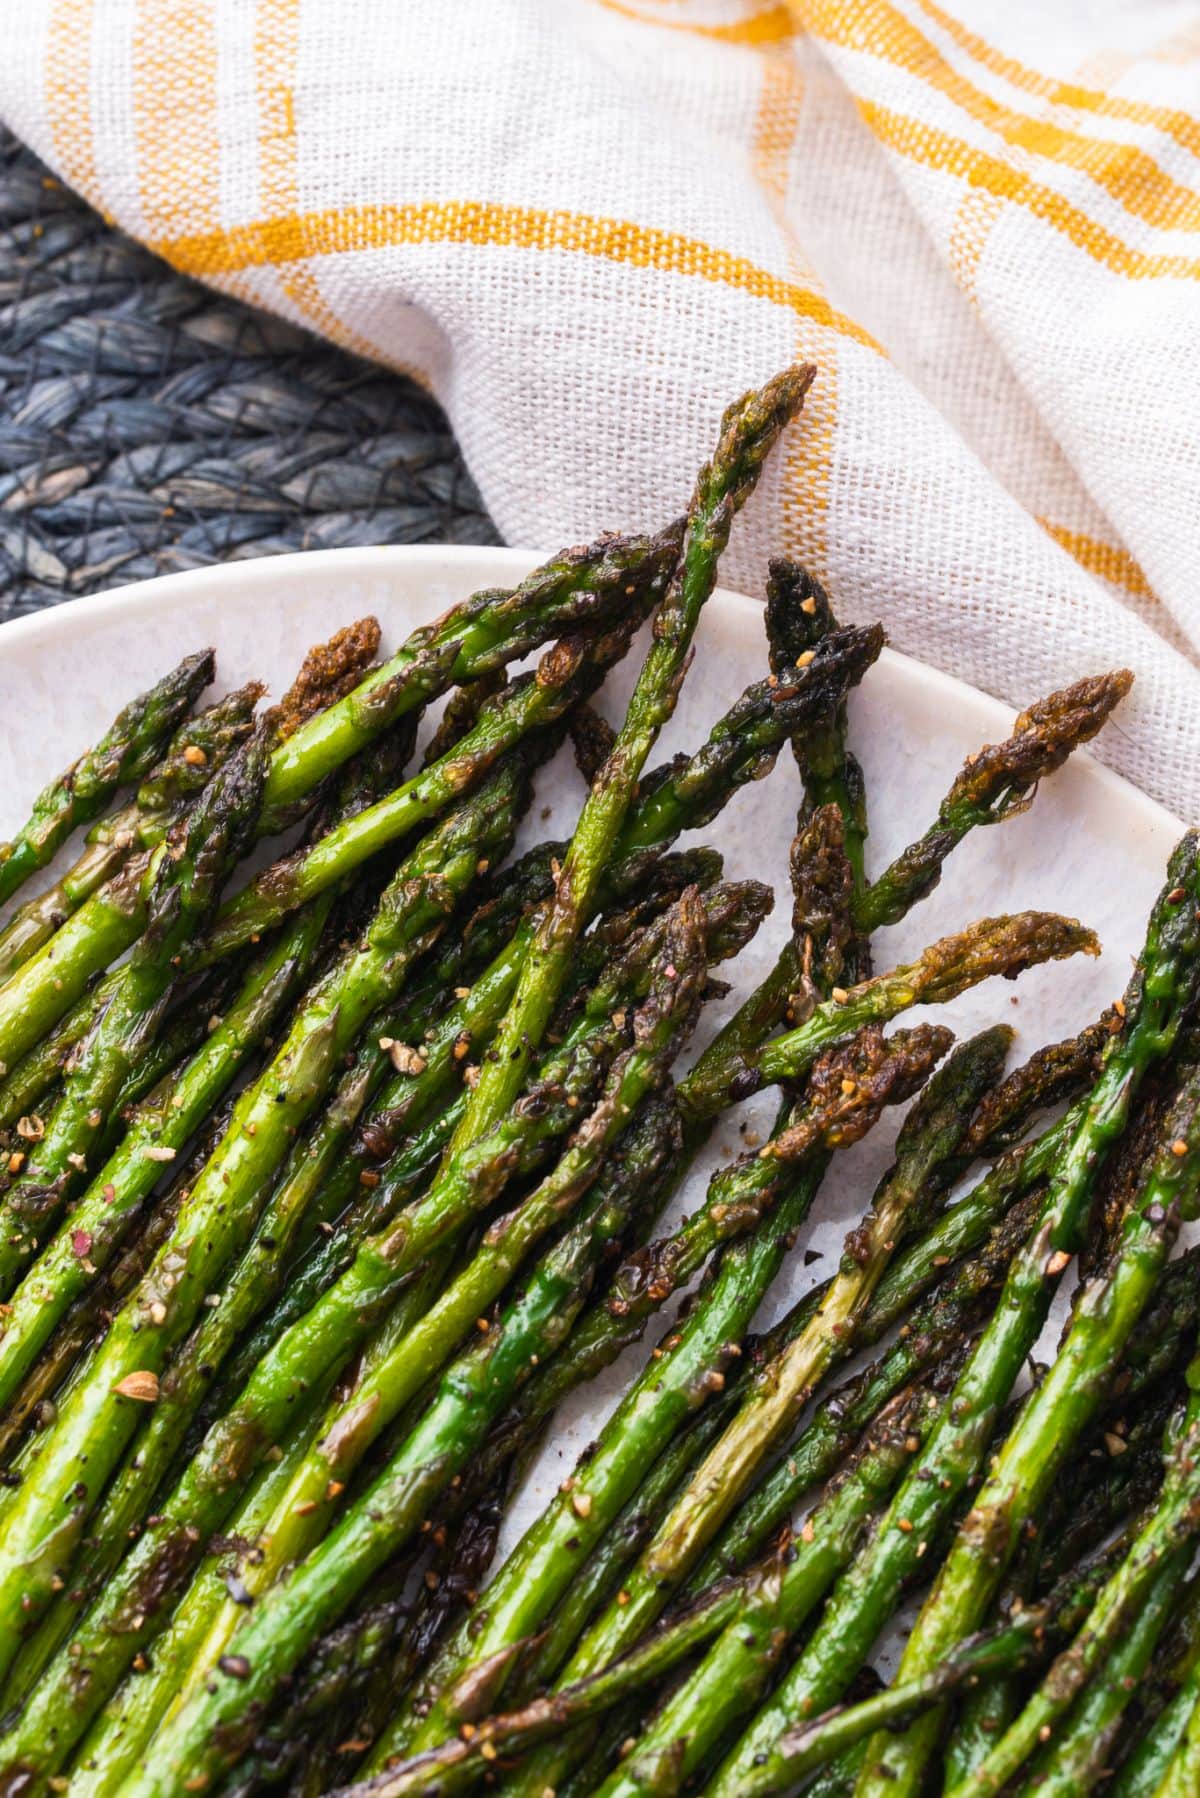 How to cook asparagus 4